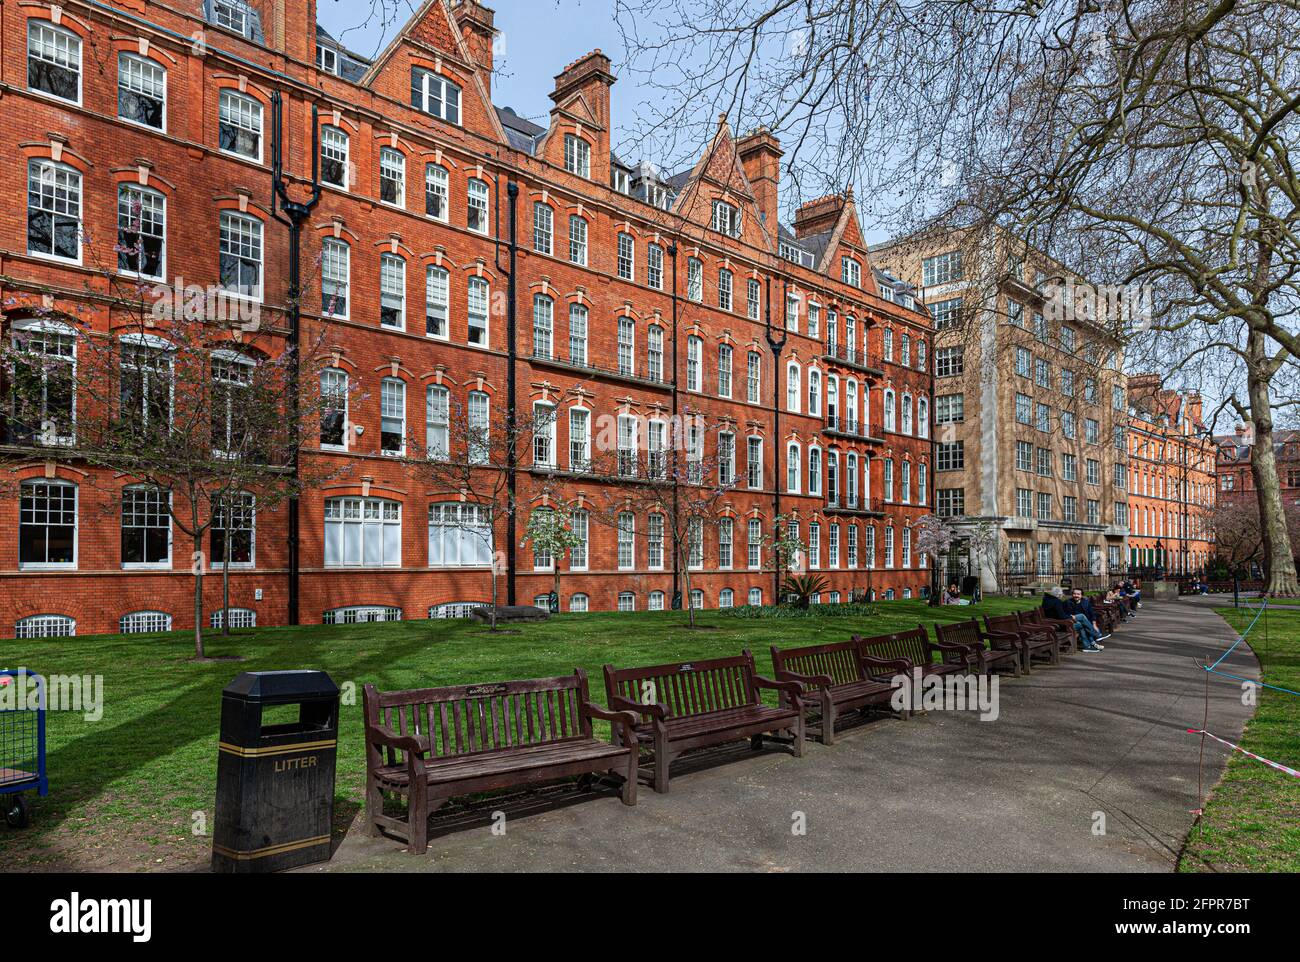 Mount Street Gardens, Mayfair, Londres, Angleterre, Royaume-Uni. Banque D'Images